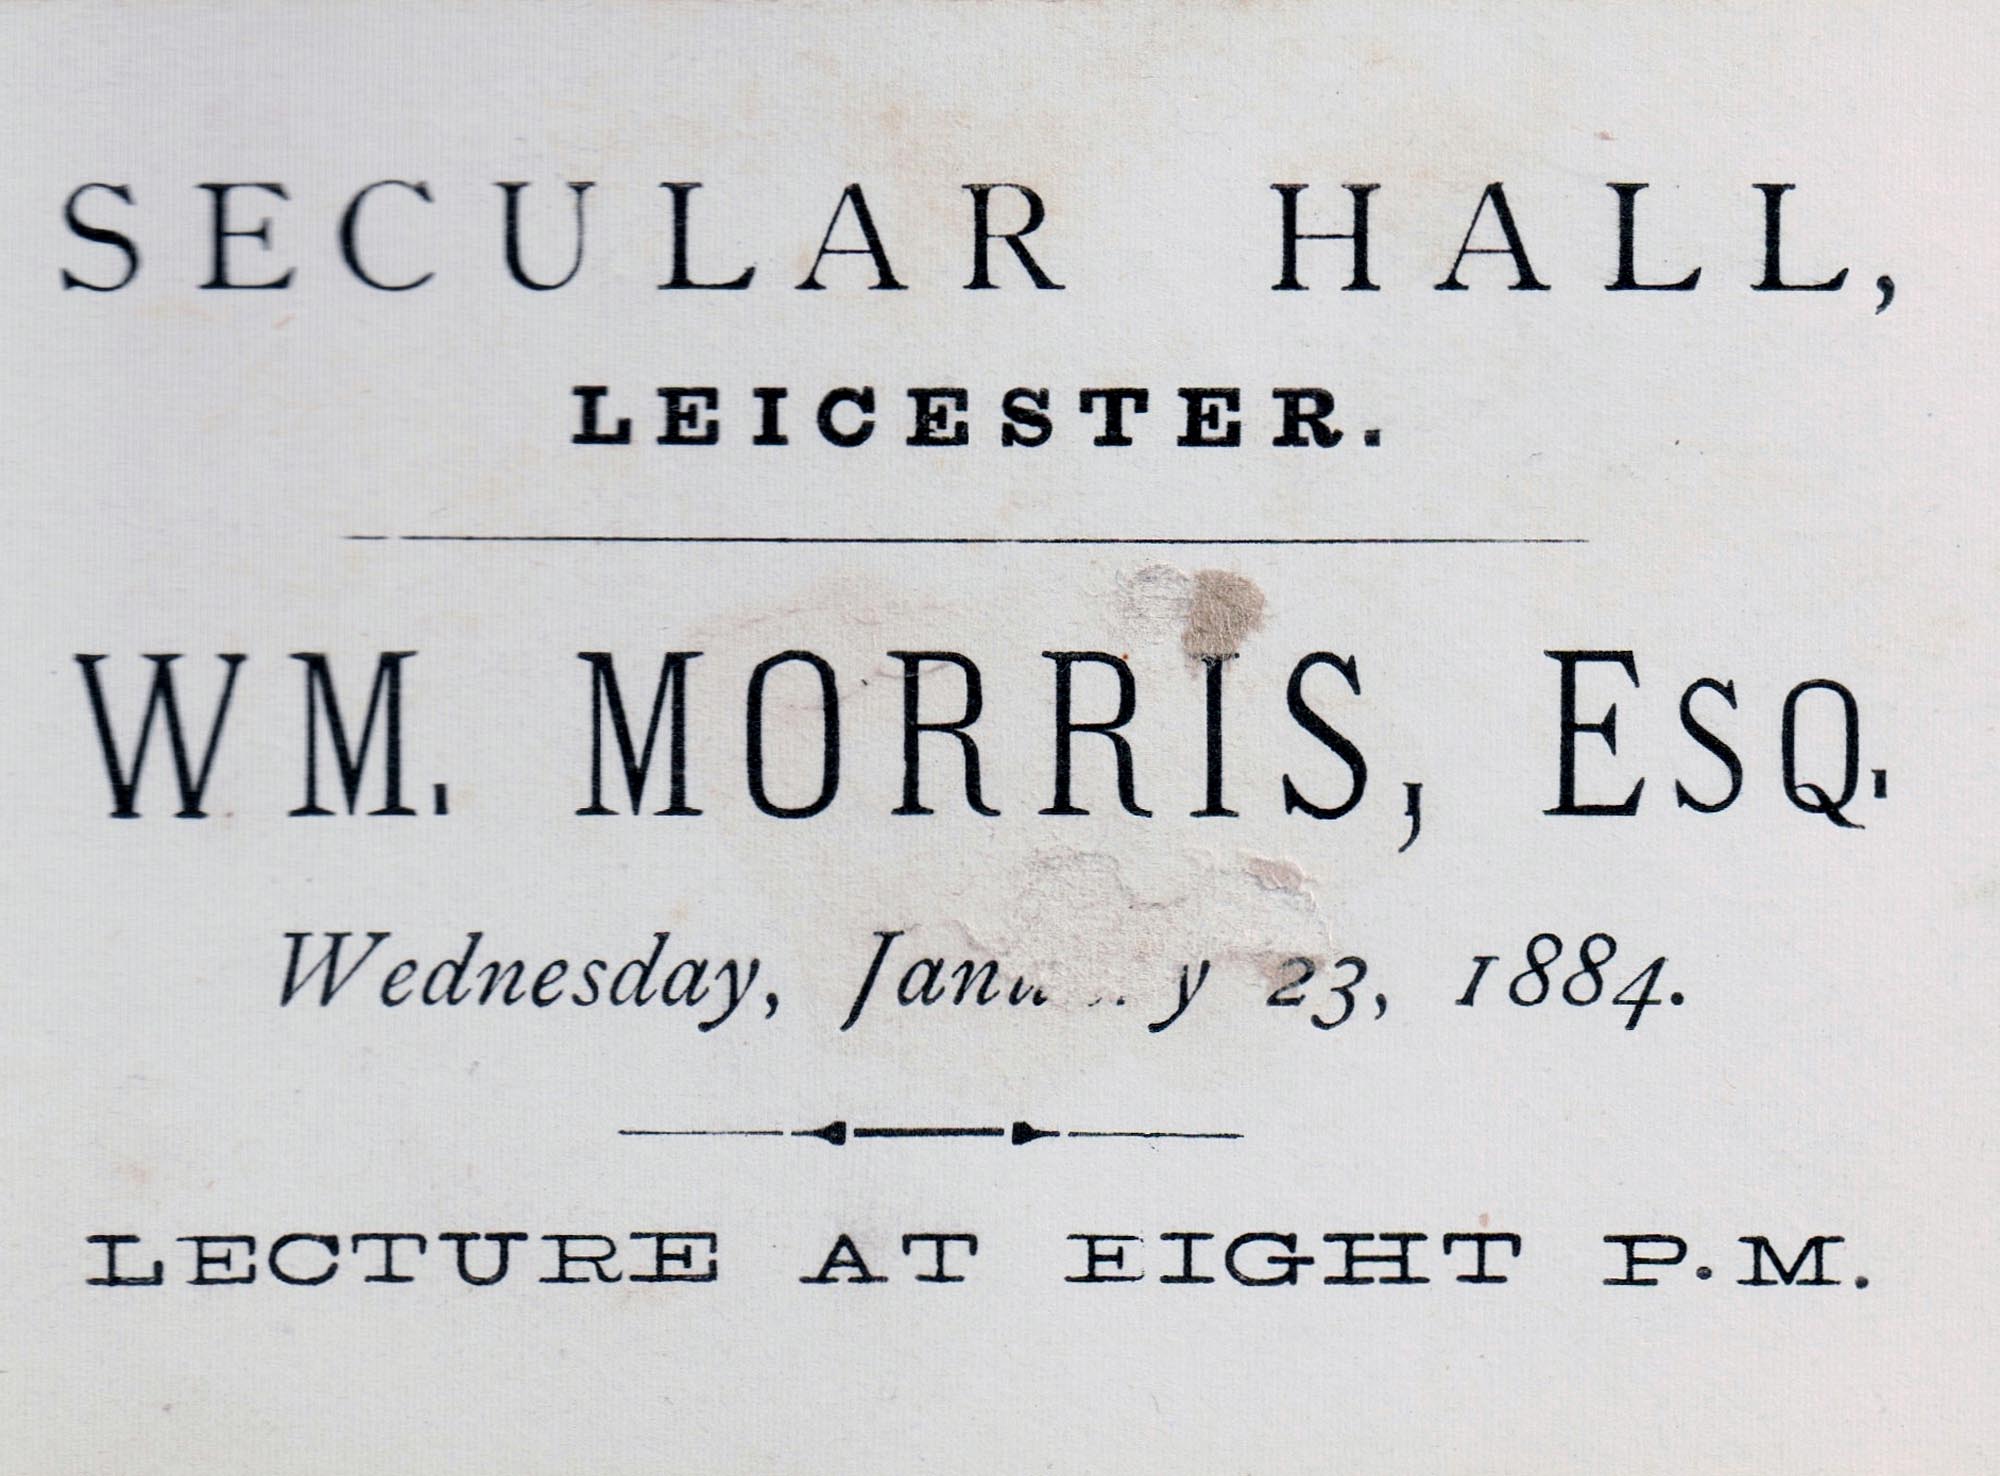 Ticket to the famous William Morris lecture of 1884 -